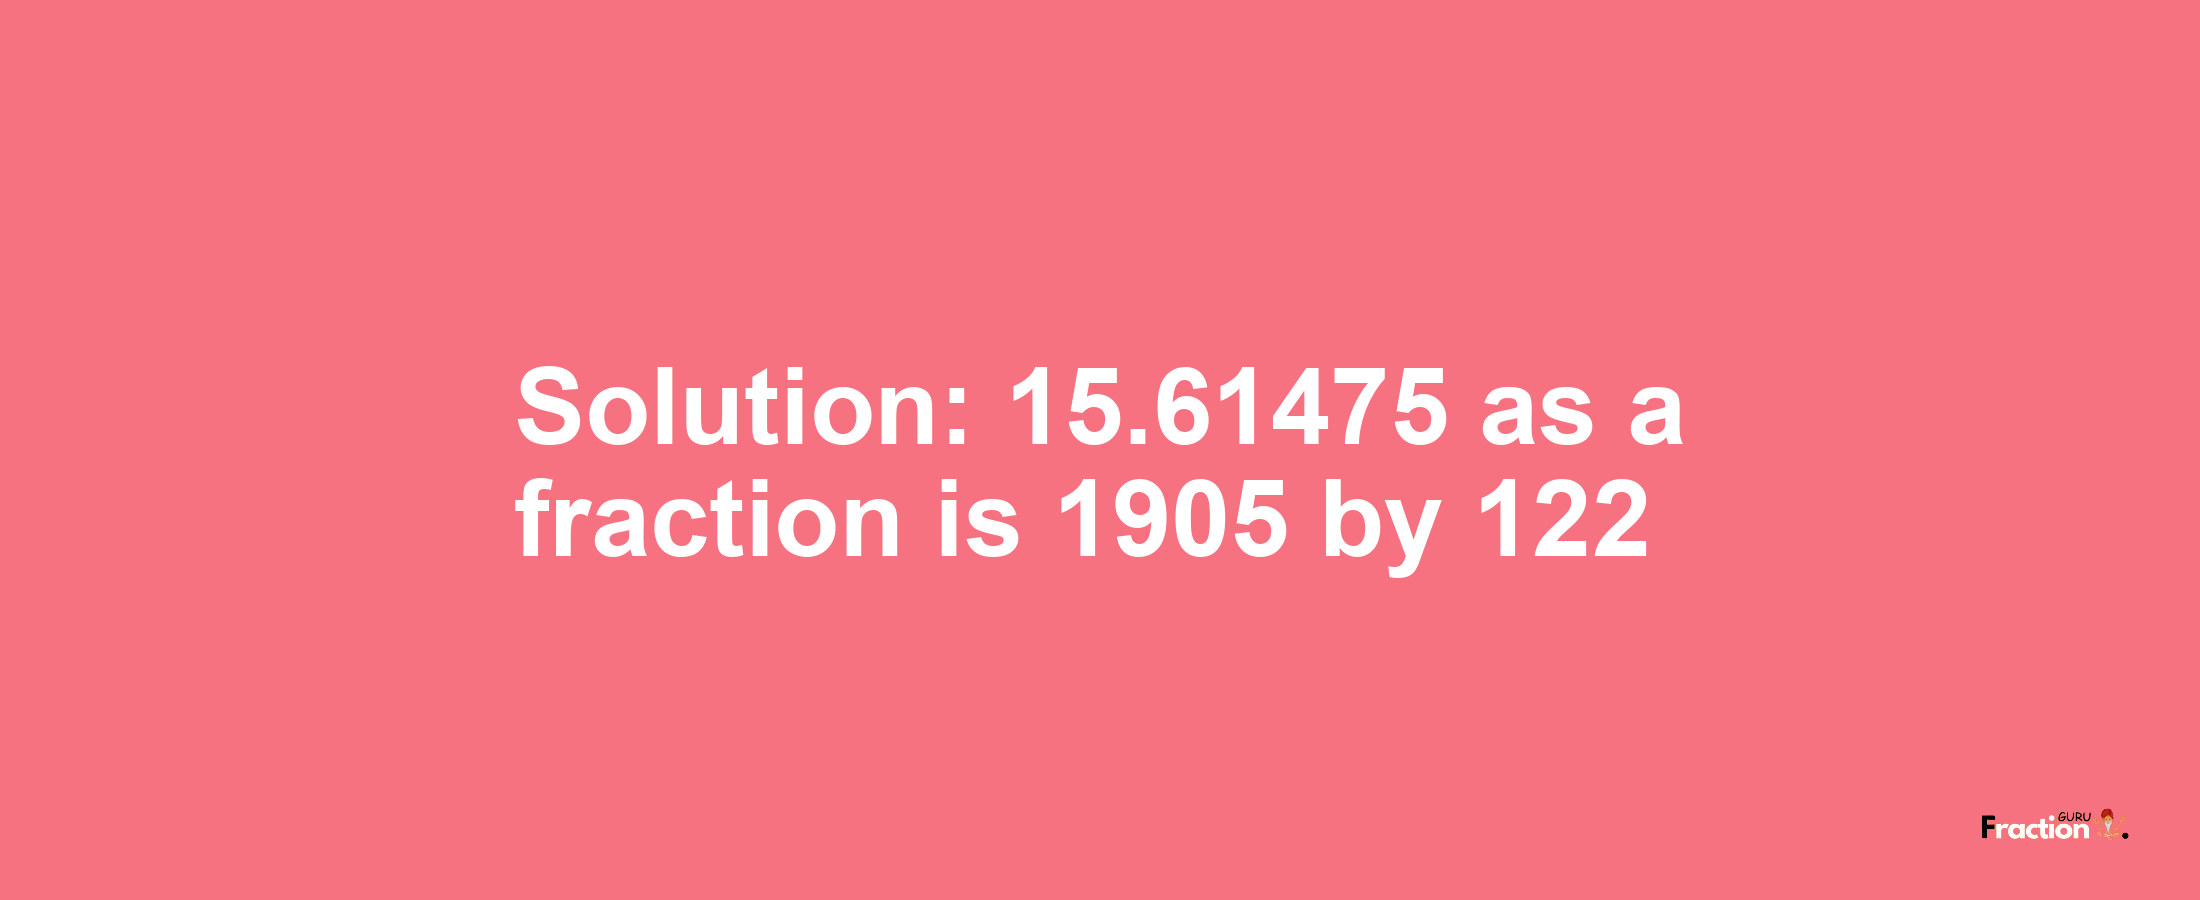 Solution:15.61475 as a fraction is 1905/122